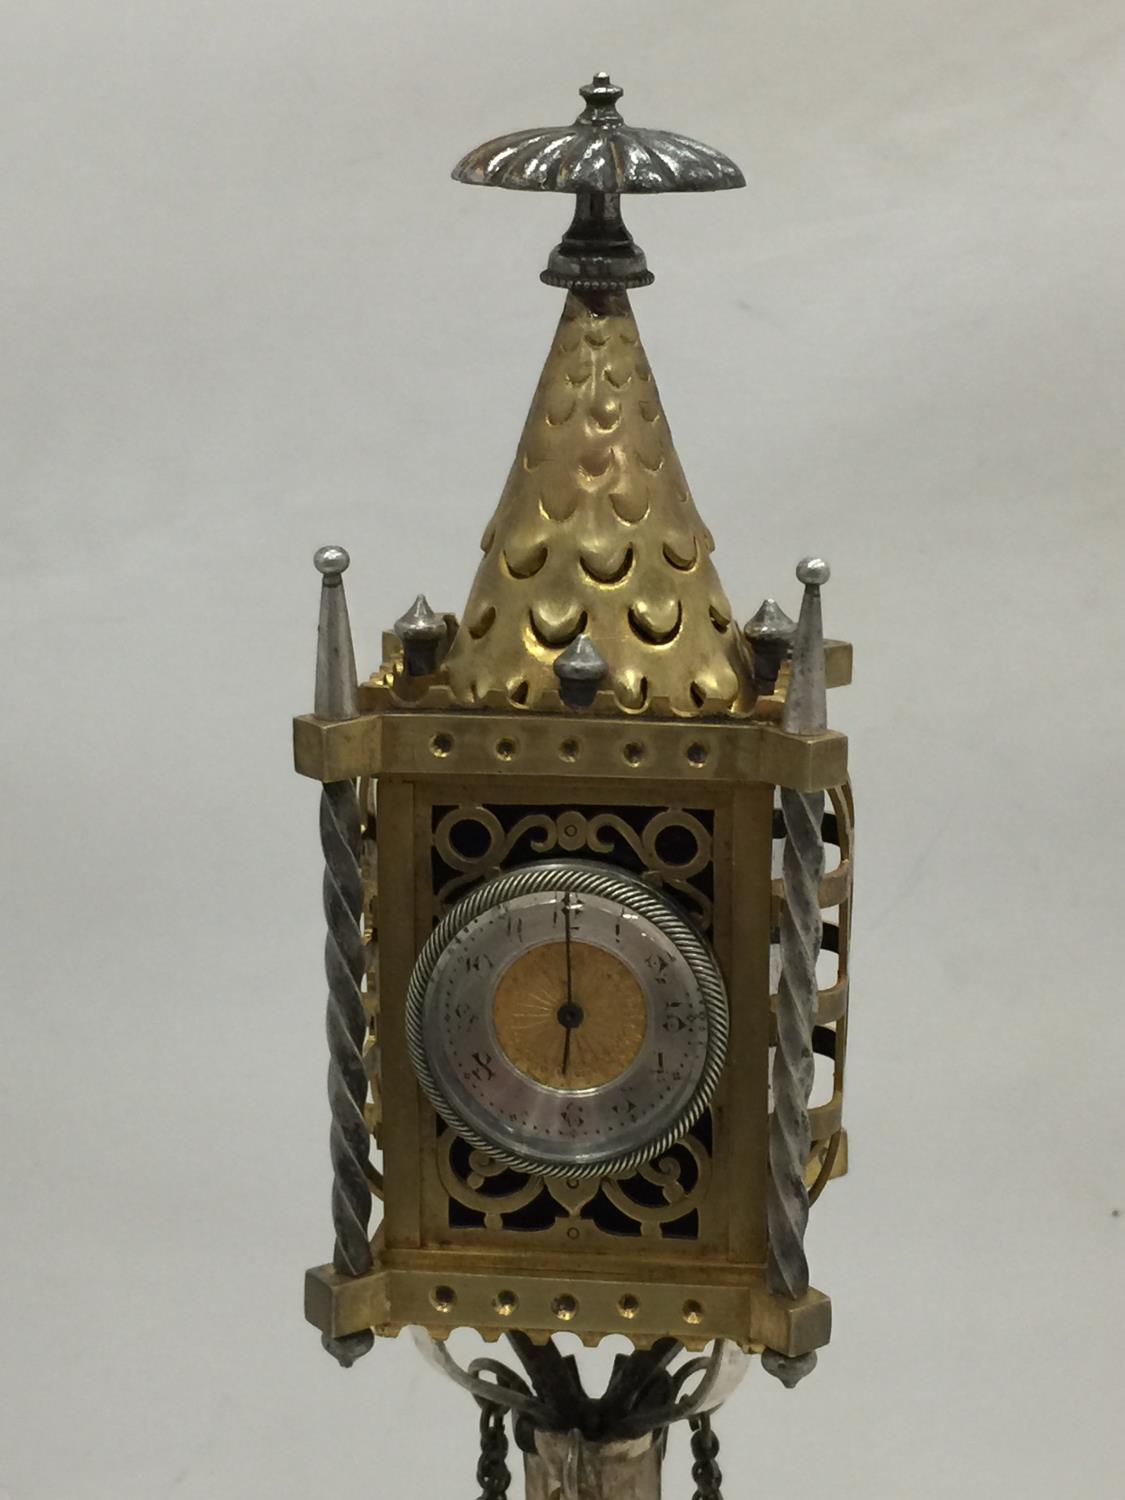 AN ORNATE FRENCH MANTLE CLOCK H: 40CM - Image 2 of 8